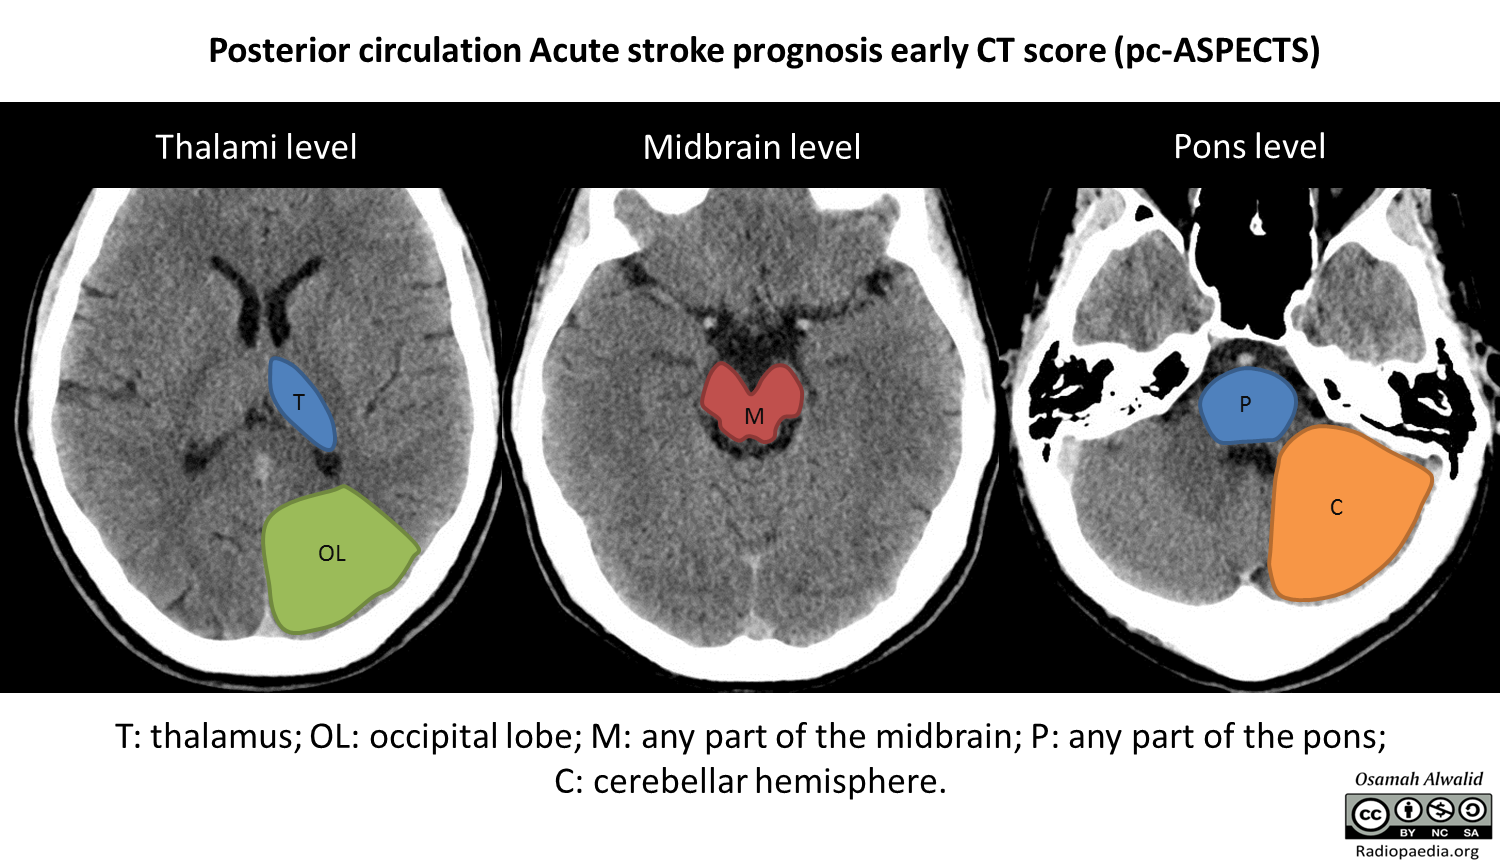 Figure 5: Illustration of the acute stroke prognosis early CT score (ASPECTS) of the posterior circulation. Case courtesy of Dr Osamah A. A. Alwalid, <a href="https://radiopaedia.org/">Radiopaedia.org</a>. From the case <a href="https://radiopaedia.org/cases/72707">rID: 72707</a>